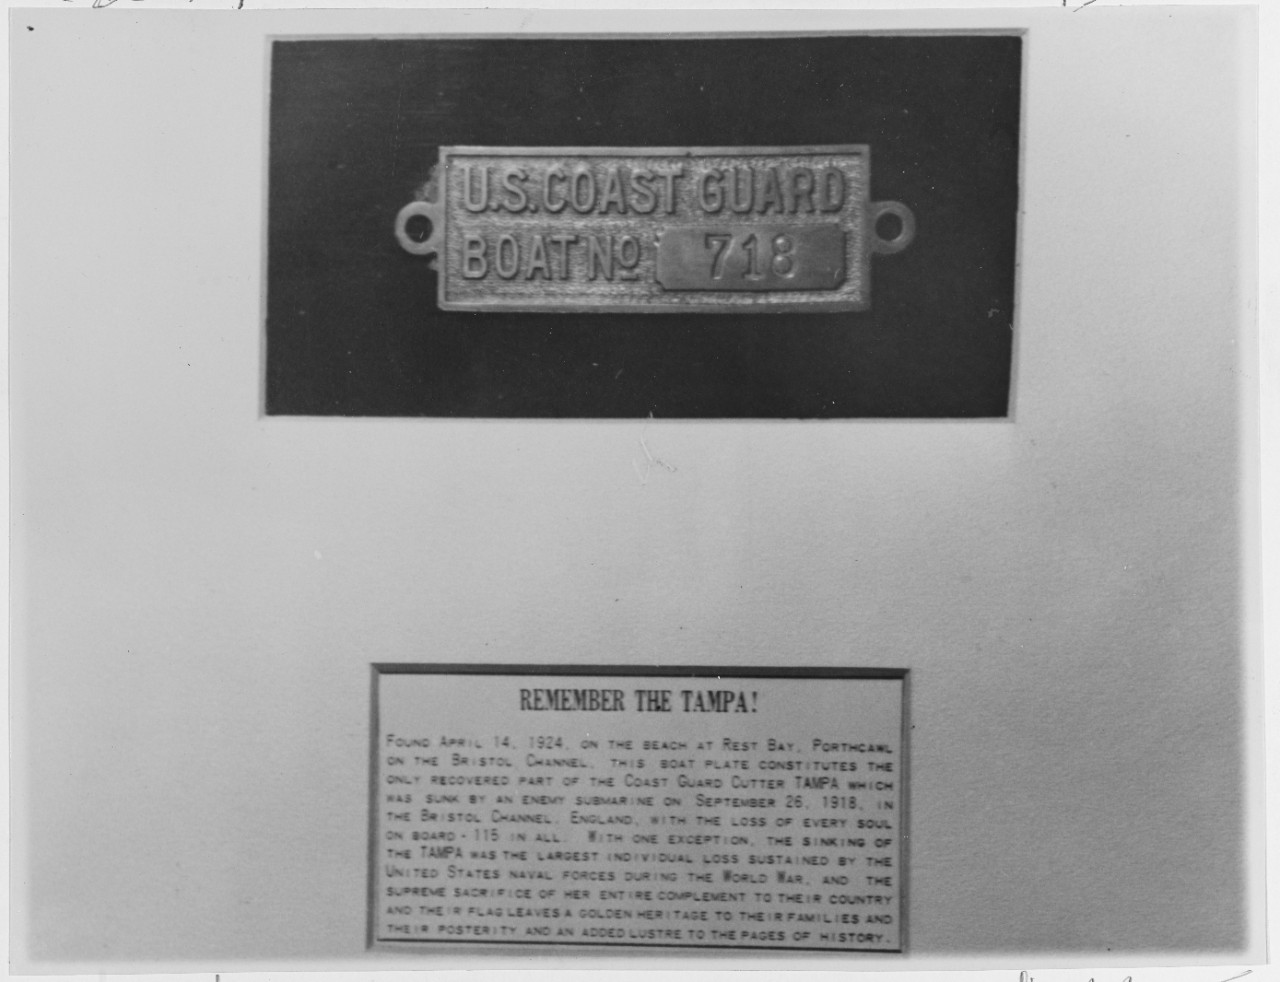 This boat plate from Tampa was found on 14 April 1924 on the beach at Rest Bay, Porthcawl, Wales. Photograph received from the Commandant, U.S. Coast Guard, March 1931. (Naval History and Heritage Command Photograph NH 41869)